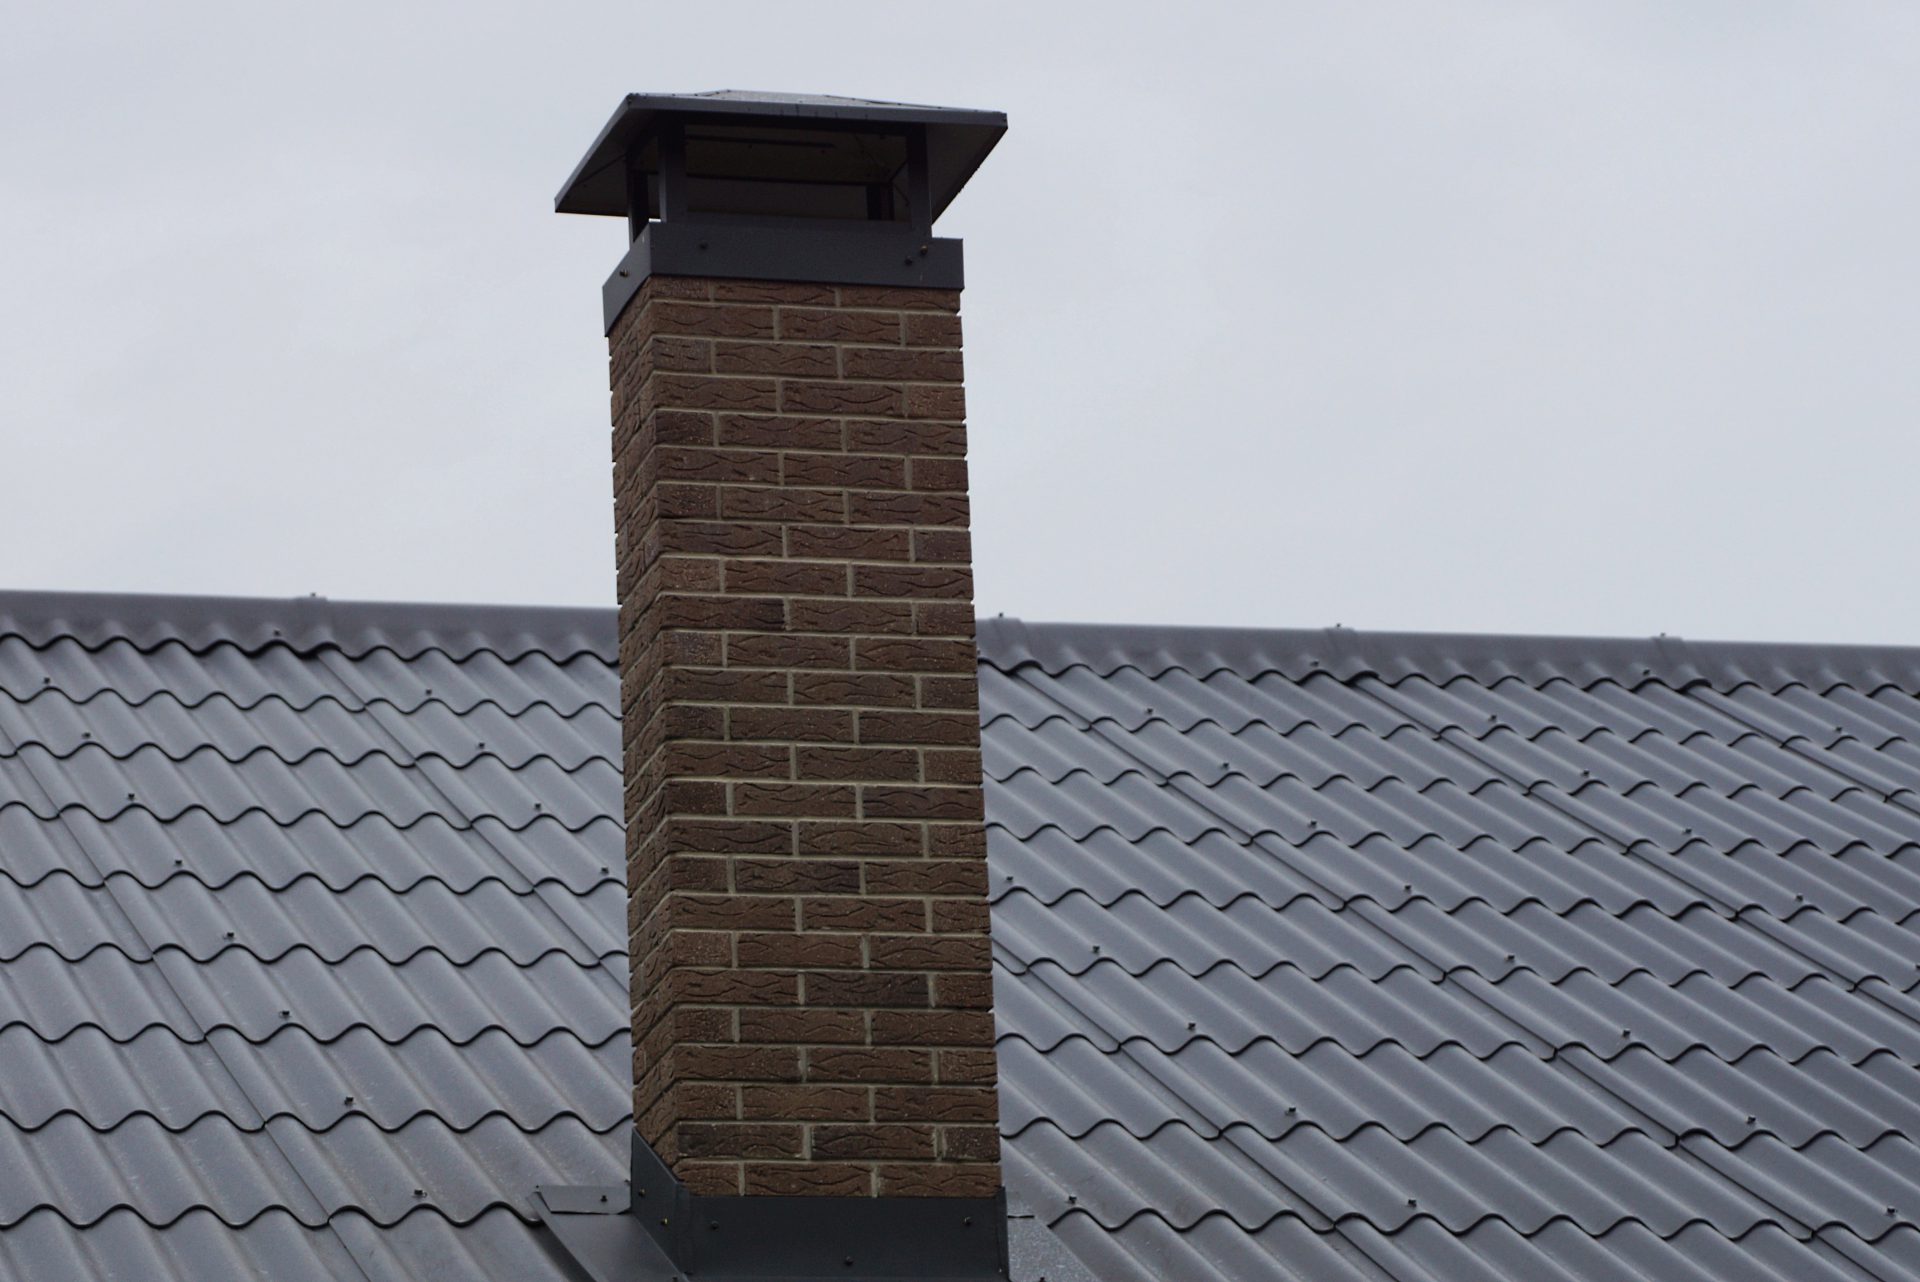 What should you do with failing chimney bricks?